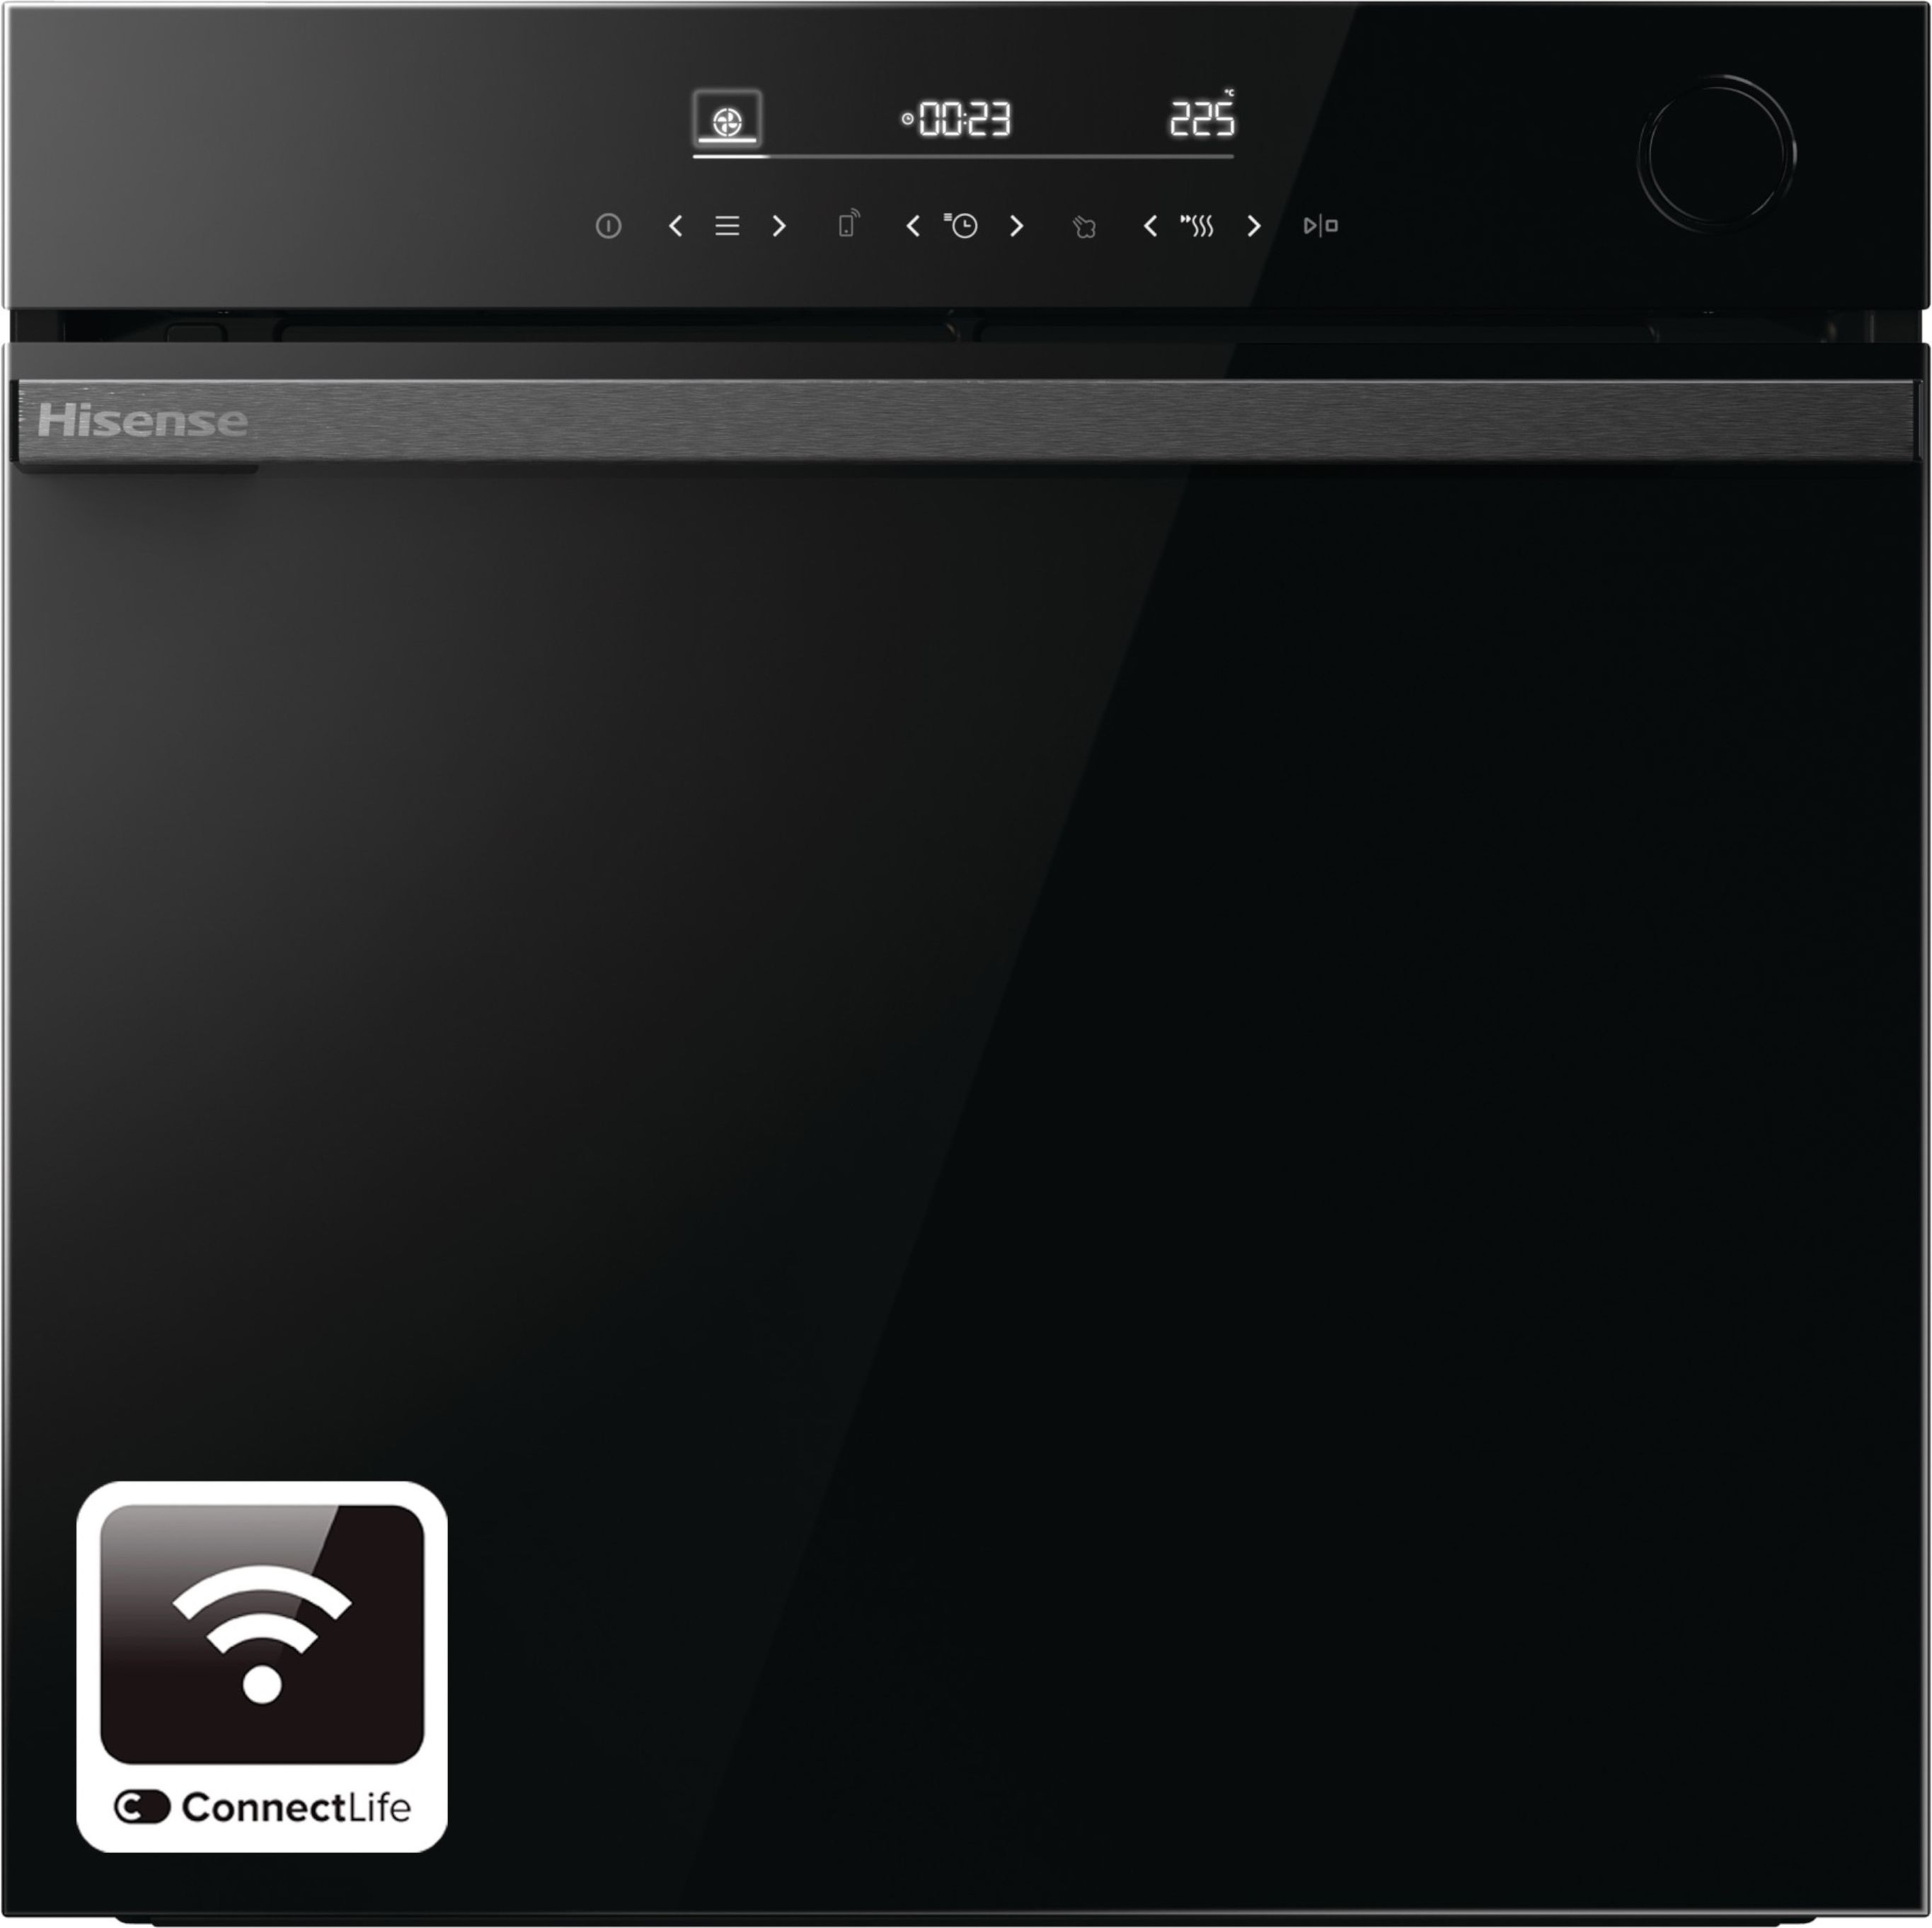 Hisense Hi6 BlackLine BSA66346ADBGUK Wifi Connected Built In Electric Single Oven - Jet Black - A+ Rated, Black